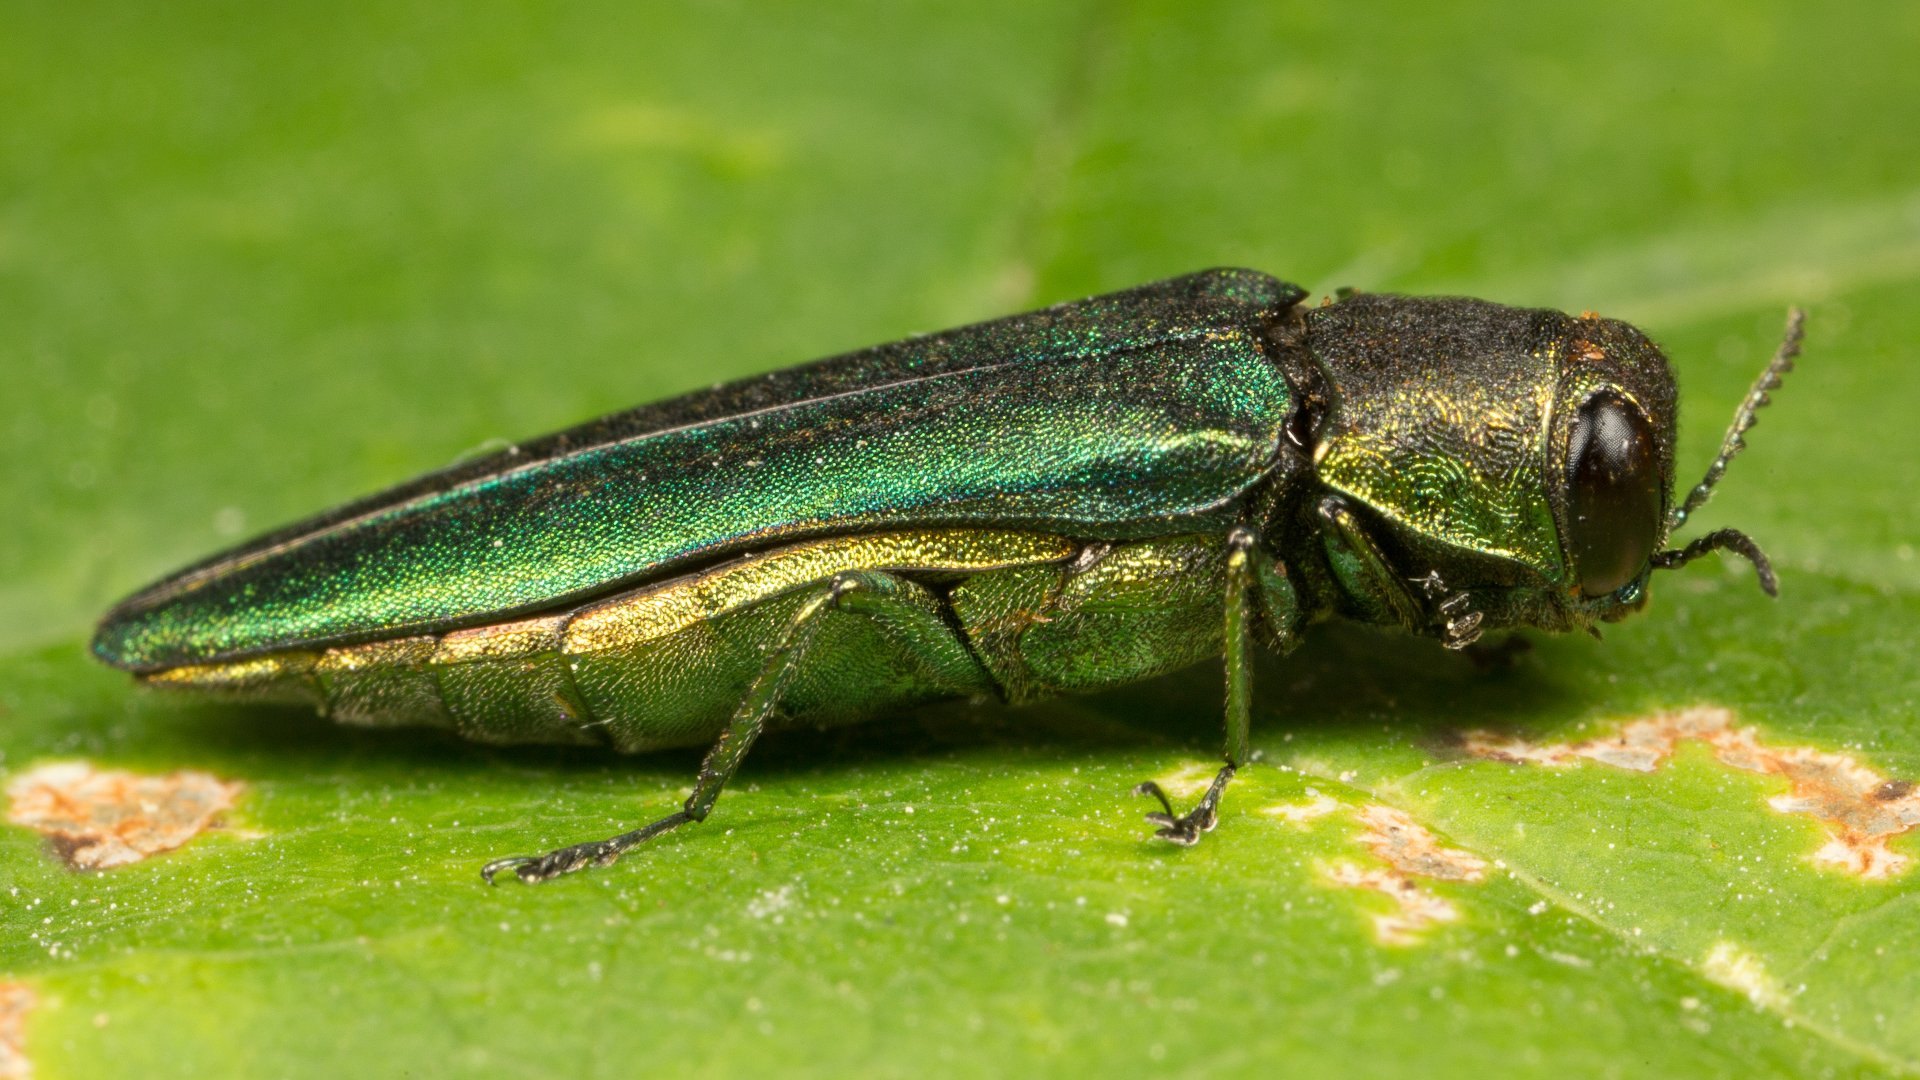 Close up on an emerald ash borer found on a leaf by our potential client's home in St. Peter, MN.